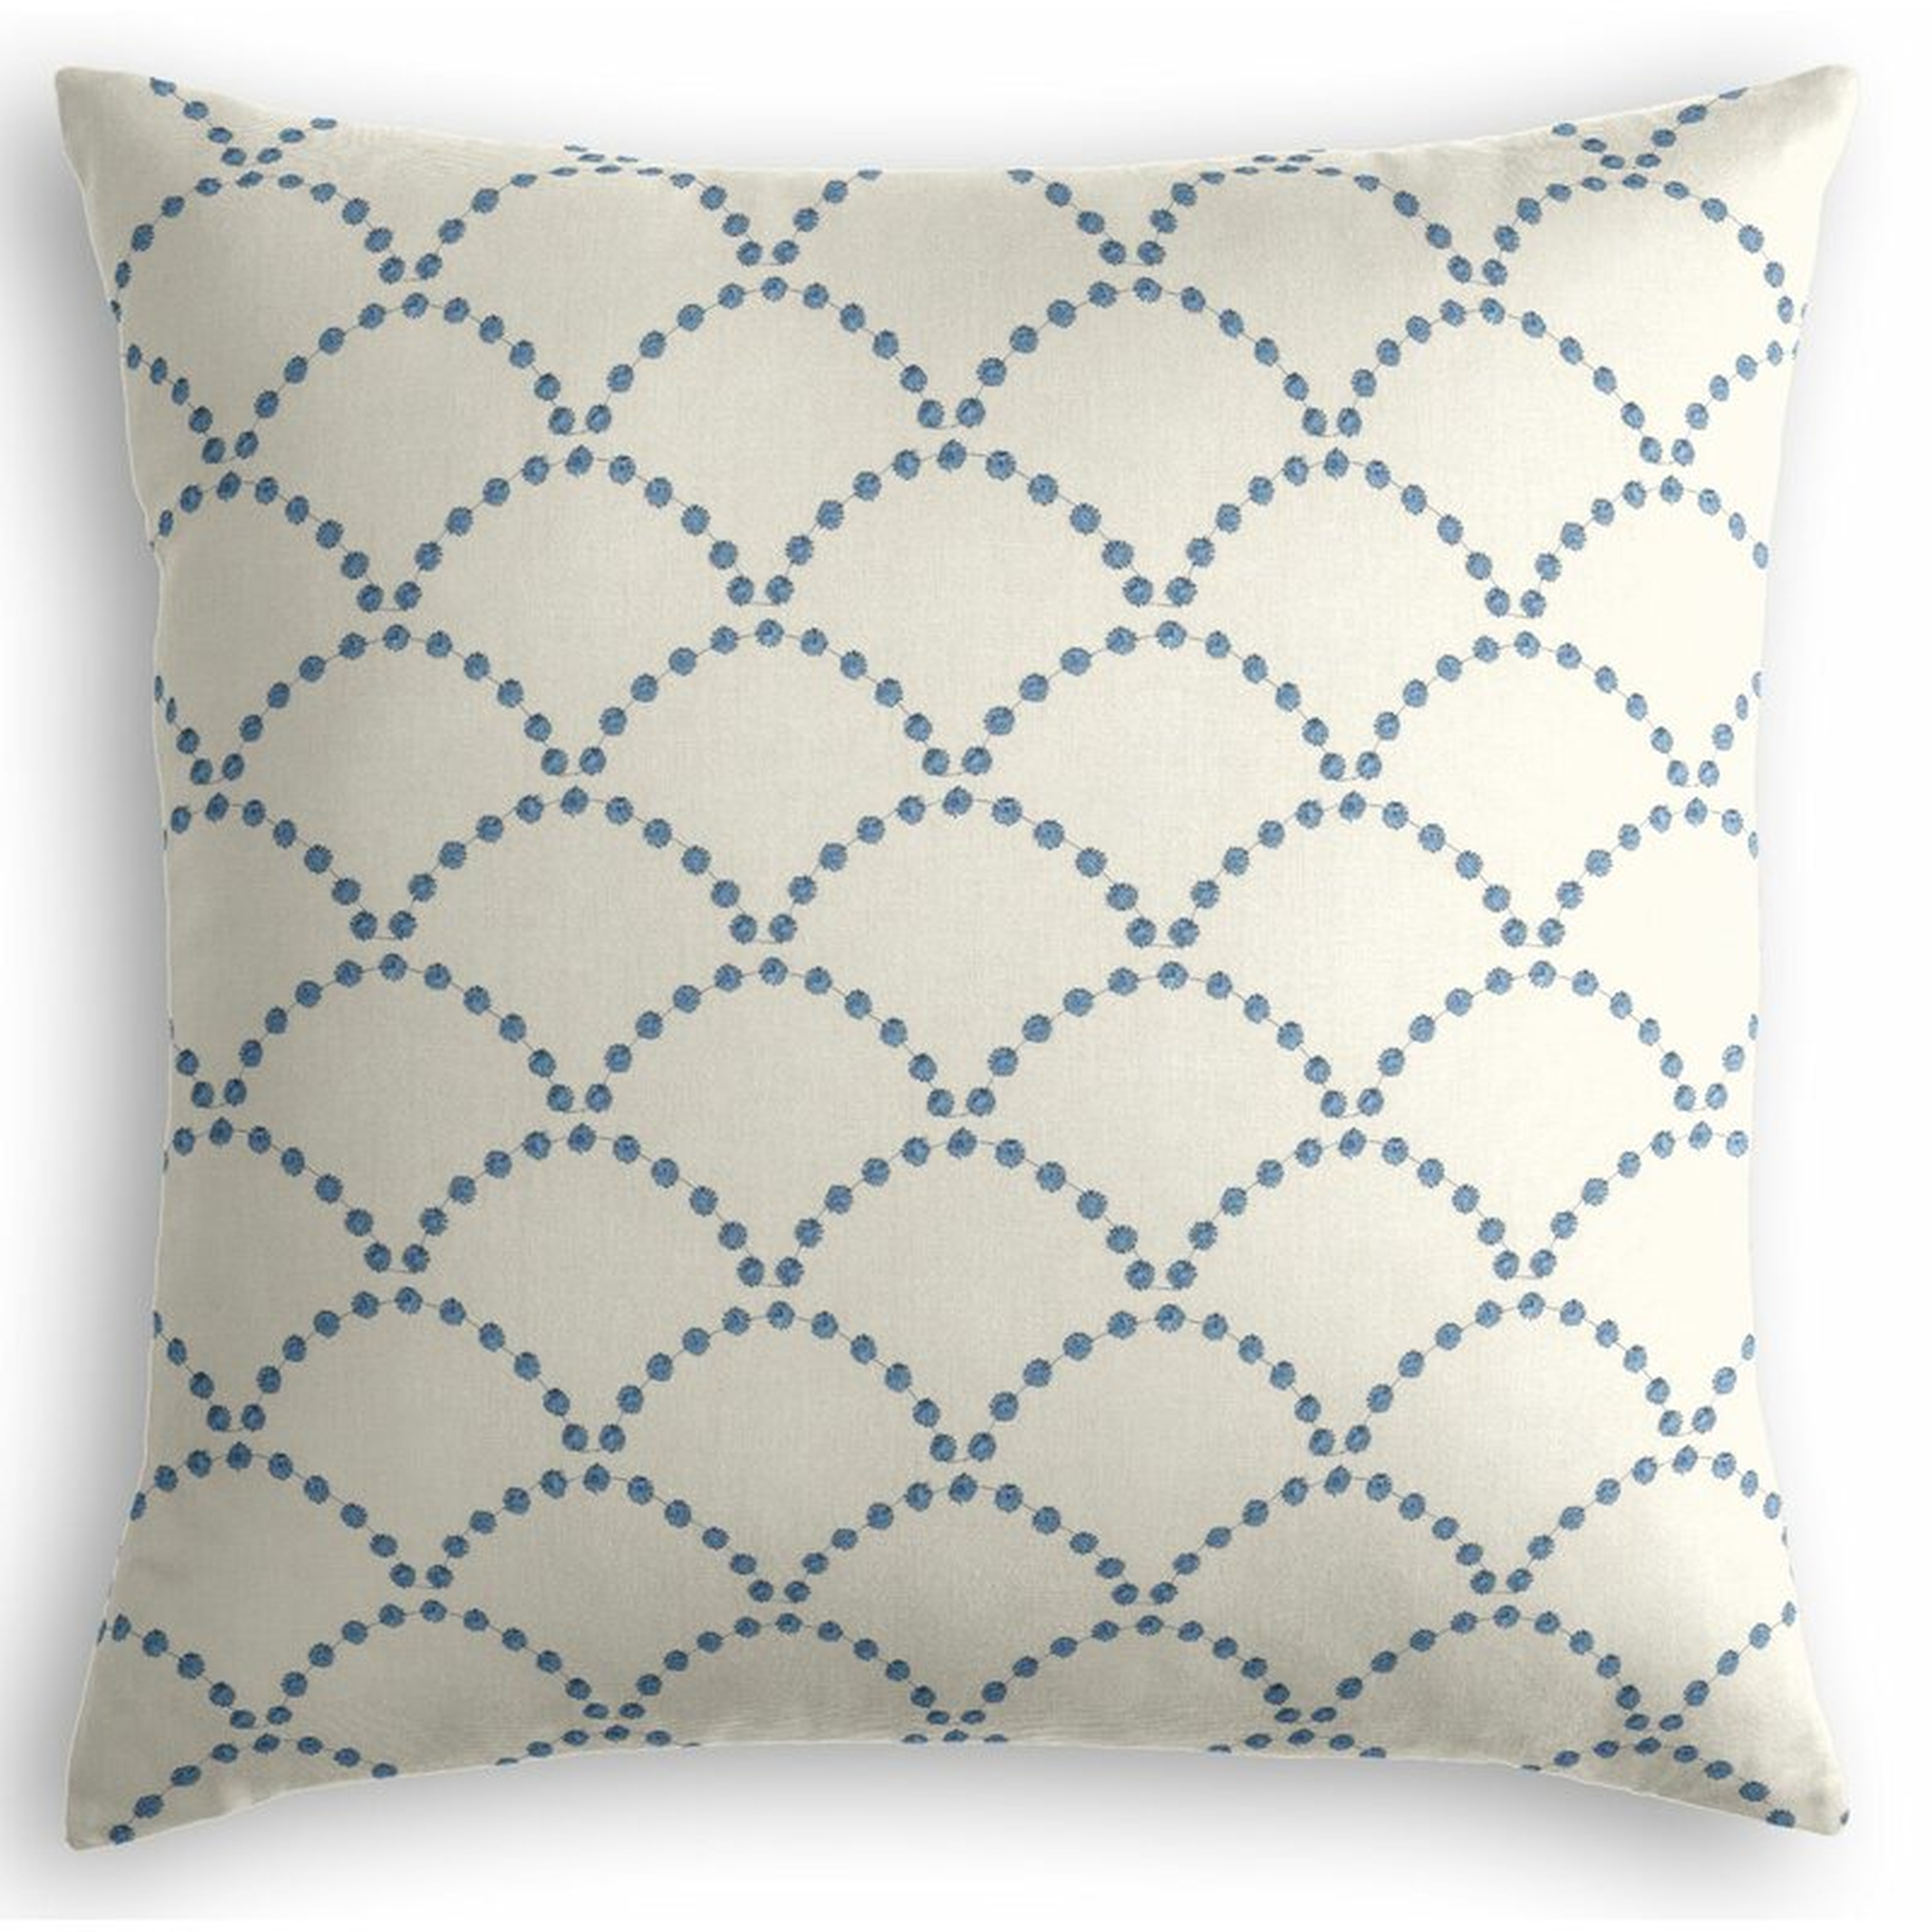 Loom Decor Embroidered Throw Pillow Size: 22" x 22" - Perigold